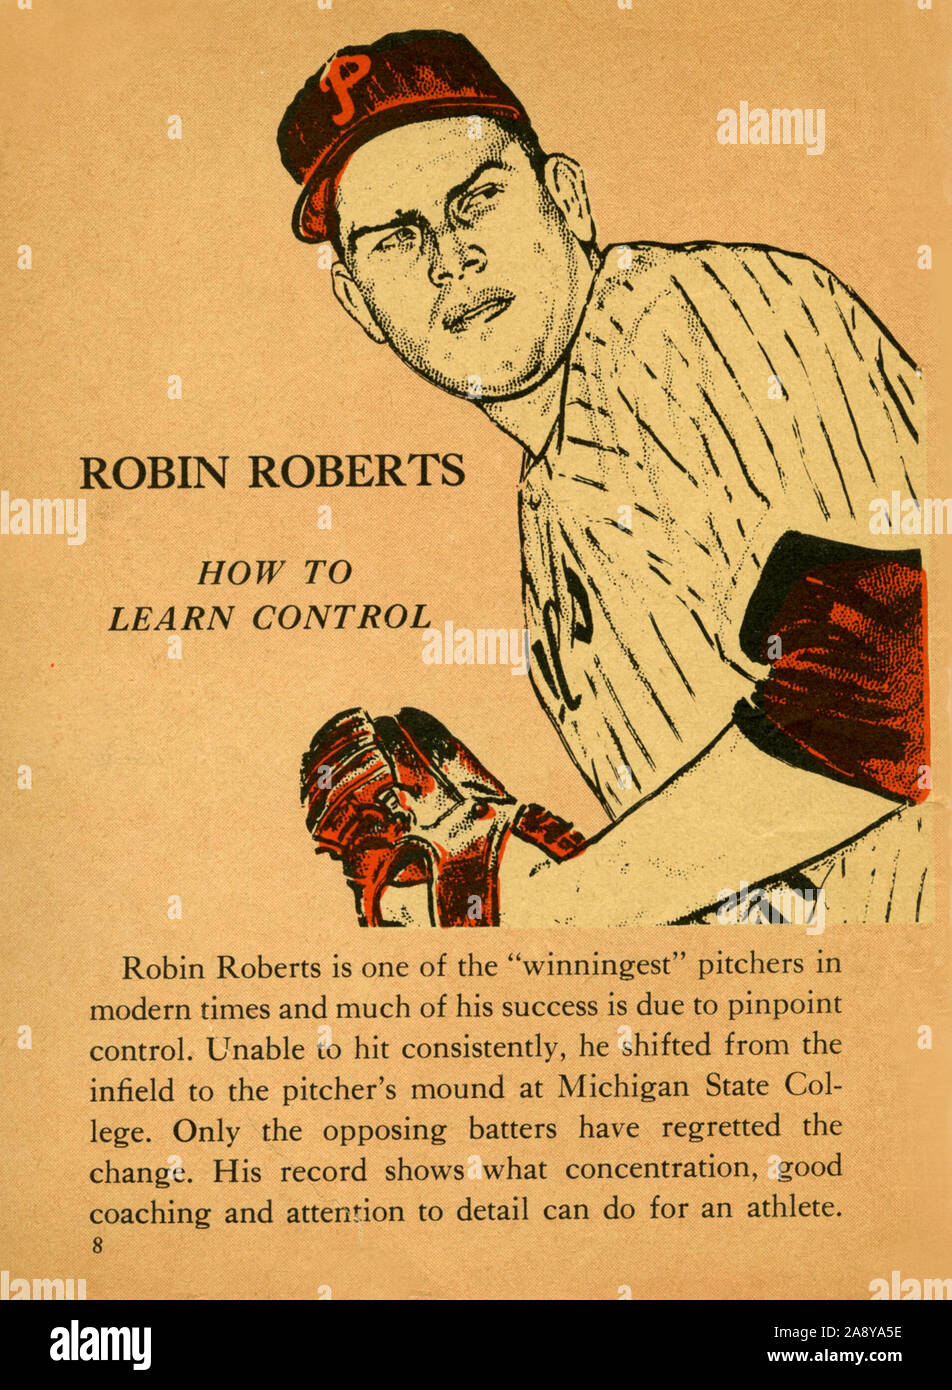 Vintage illustration of baseball player for a pamphlet teaching kids how to play baseball with tips from the pros. Stock Photo